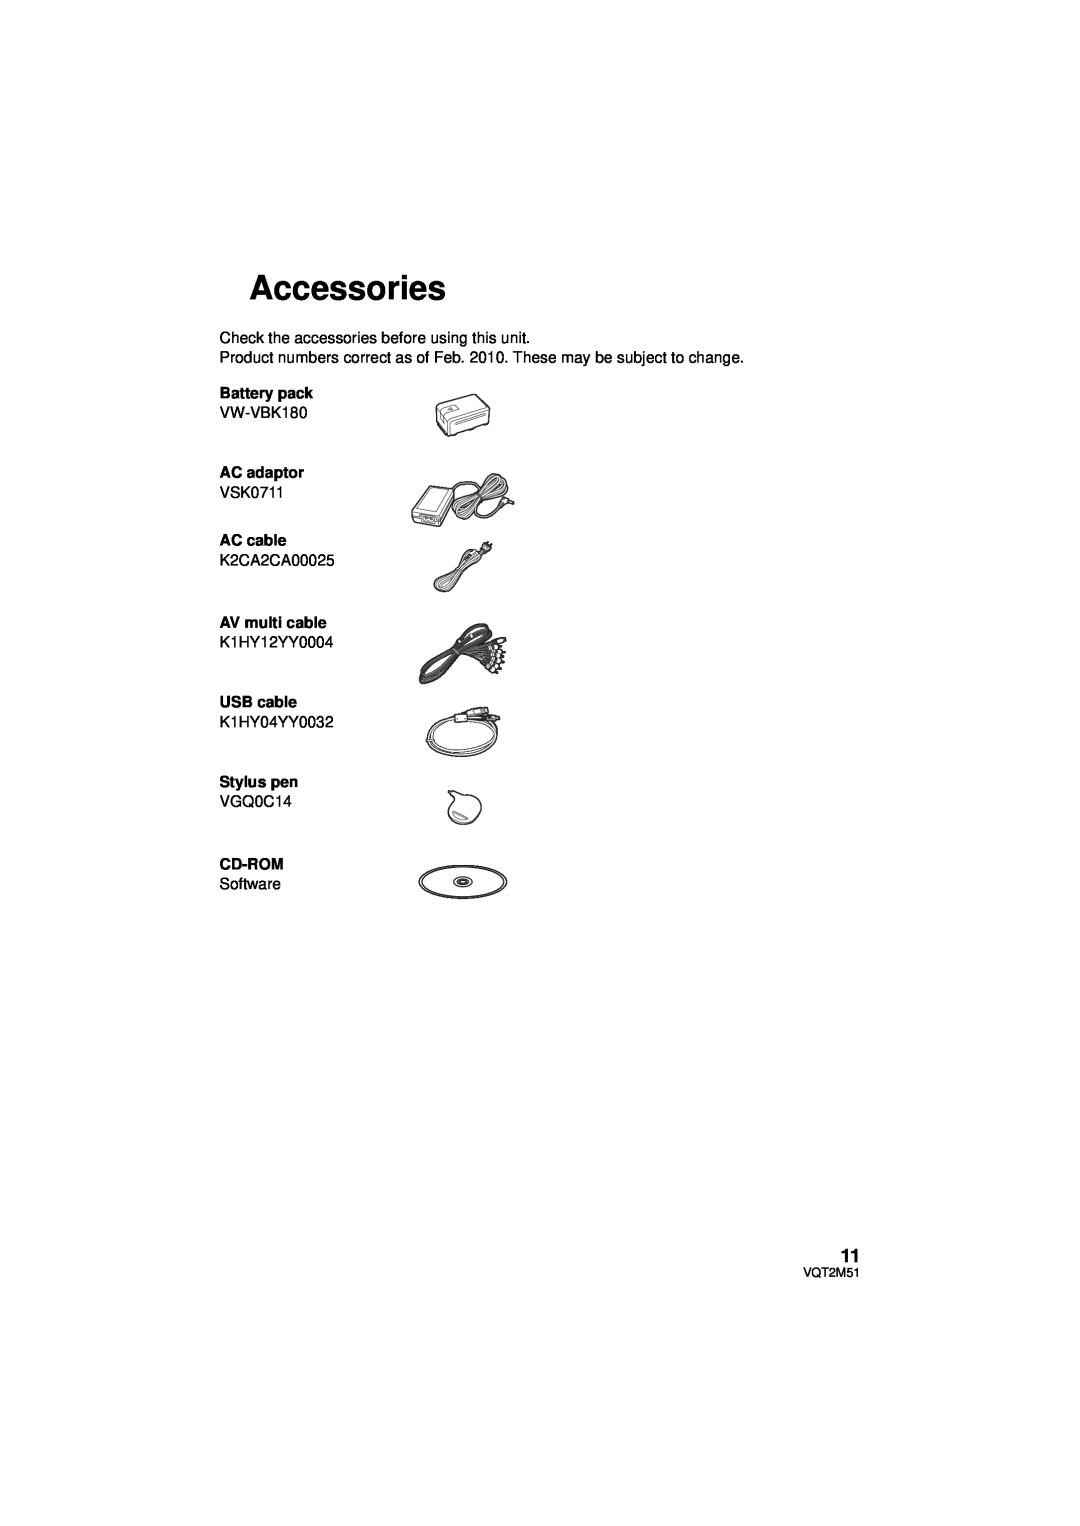 Panasonic HDC-HS60P/PC Accessories, Battery pack, AC adaptor, AC cable, AV multi cable, USB cable, Stylus pen, Cd-Rom 